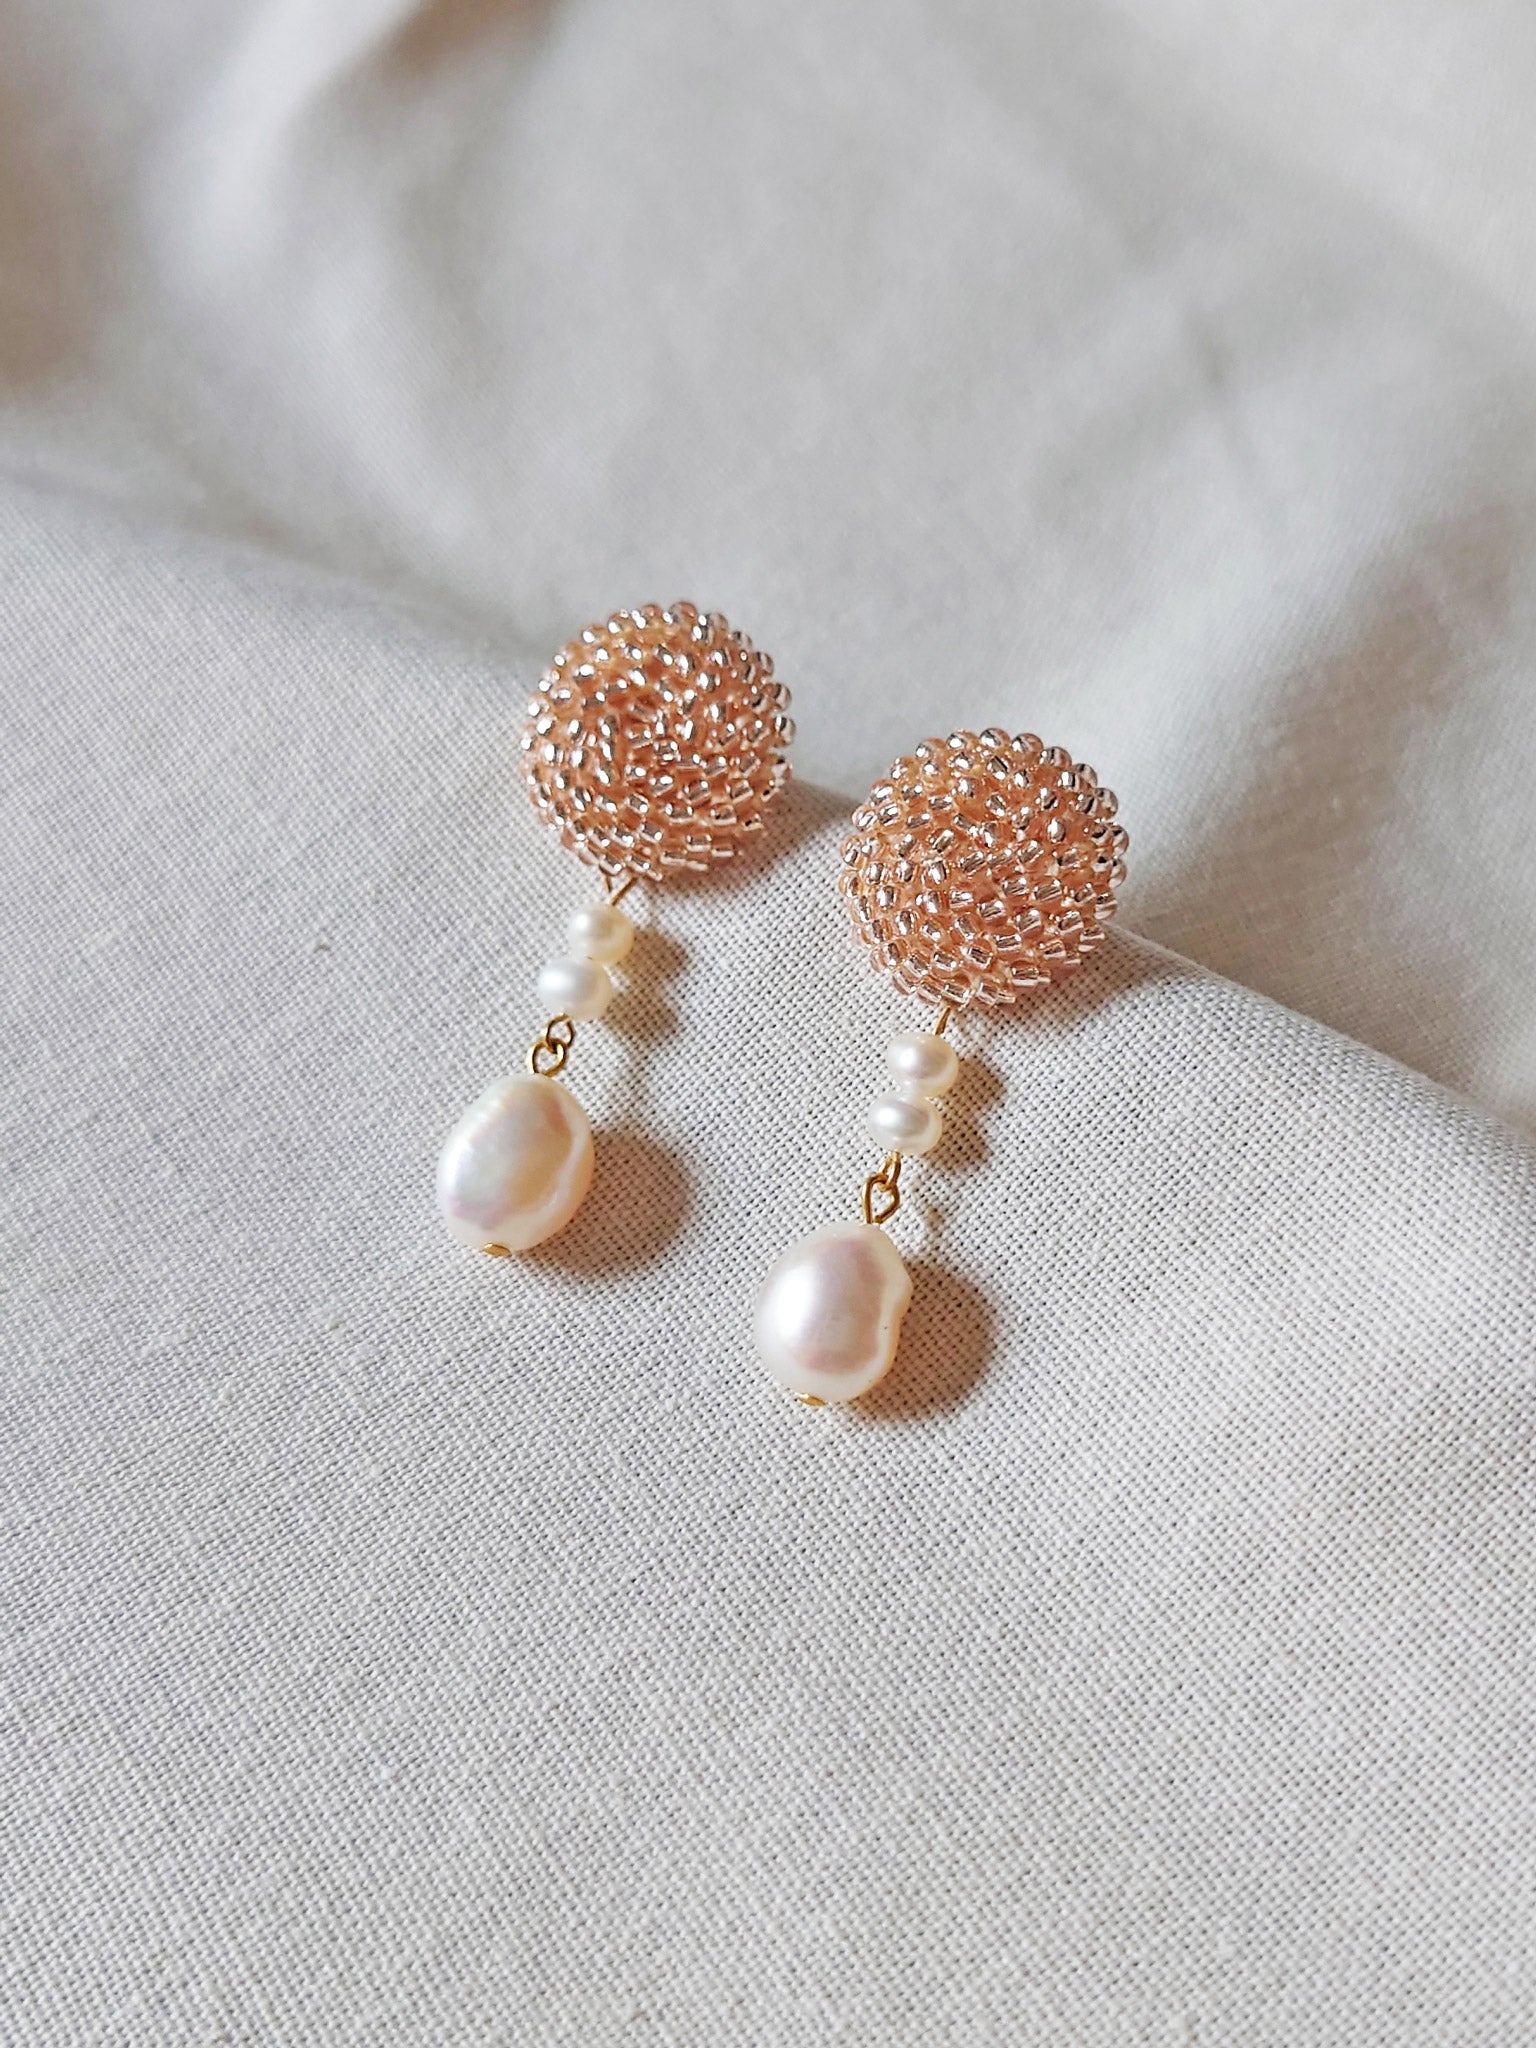 Calypso Dangle Earrings in Champagne Pink Front 1